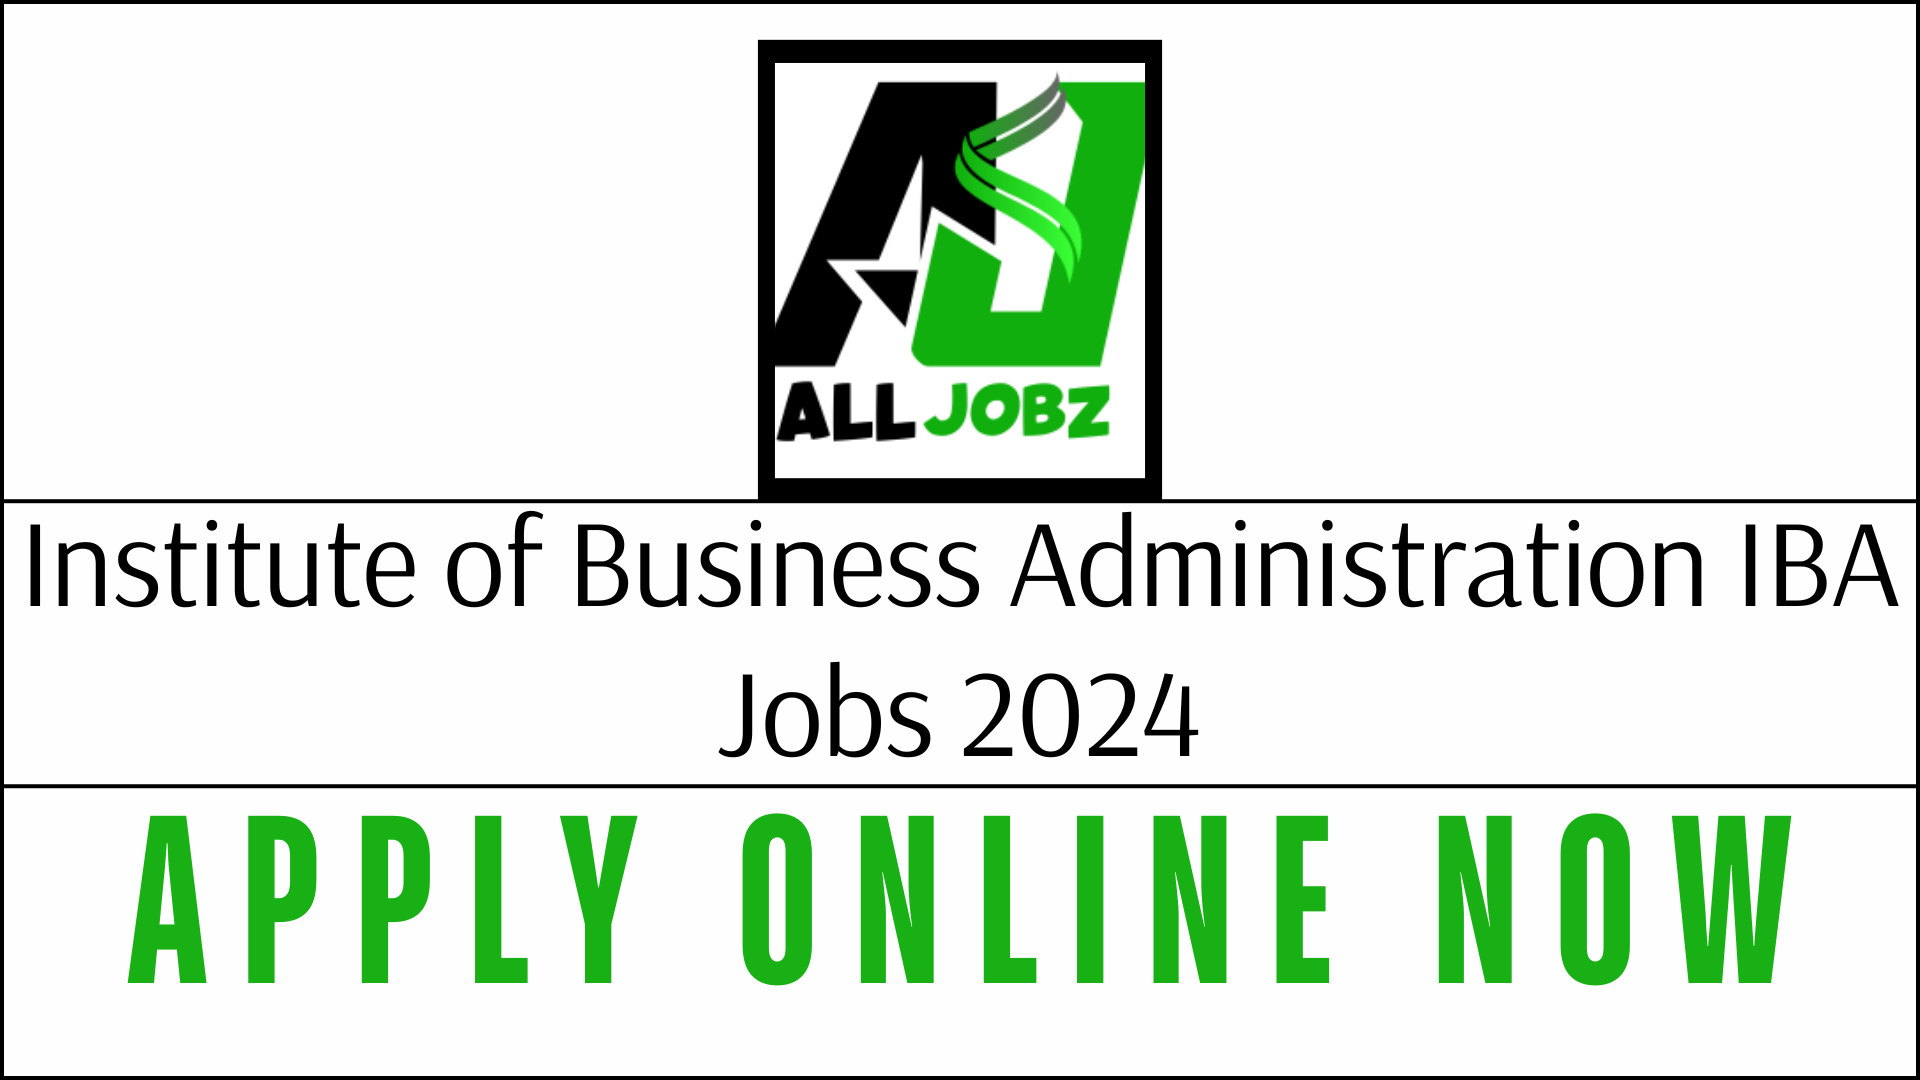 Career Opportunities At The Institute Of Business Administration Iba, List Of Career Opportunities At The Institute Of Business Administration Iba For Assistant Manager Financial Assistance And Executive Alumni Affairs, Institute Of Business Administration Iba Jobs Salary, Institute Of Business Administration Iba Jobs Apply Online, Iba Jobs Advertisement, Iba Government Jobs, Iba Jobs Apply Online, Iba Jobs 2024, Iba Jobs Advertisement, Iba Jobs Sindh, Iba Career Portal, Iba Job Application Form, Iba Teaching Jobs,